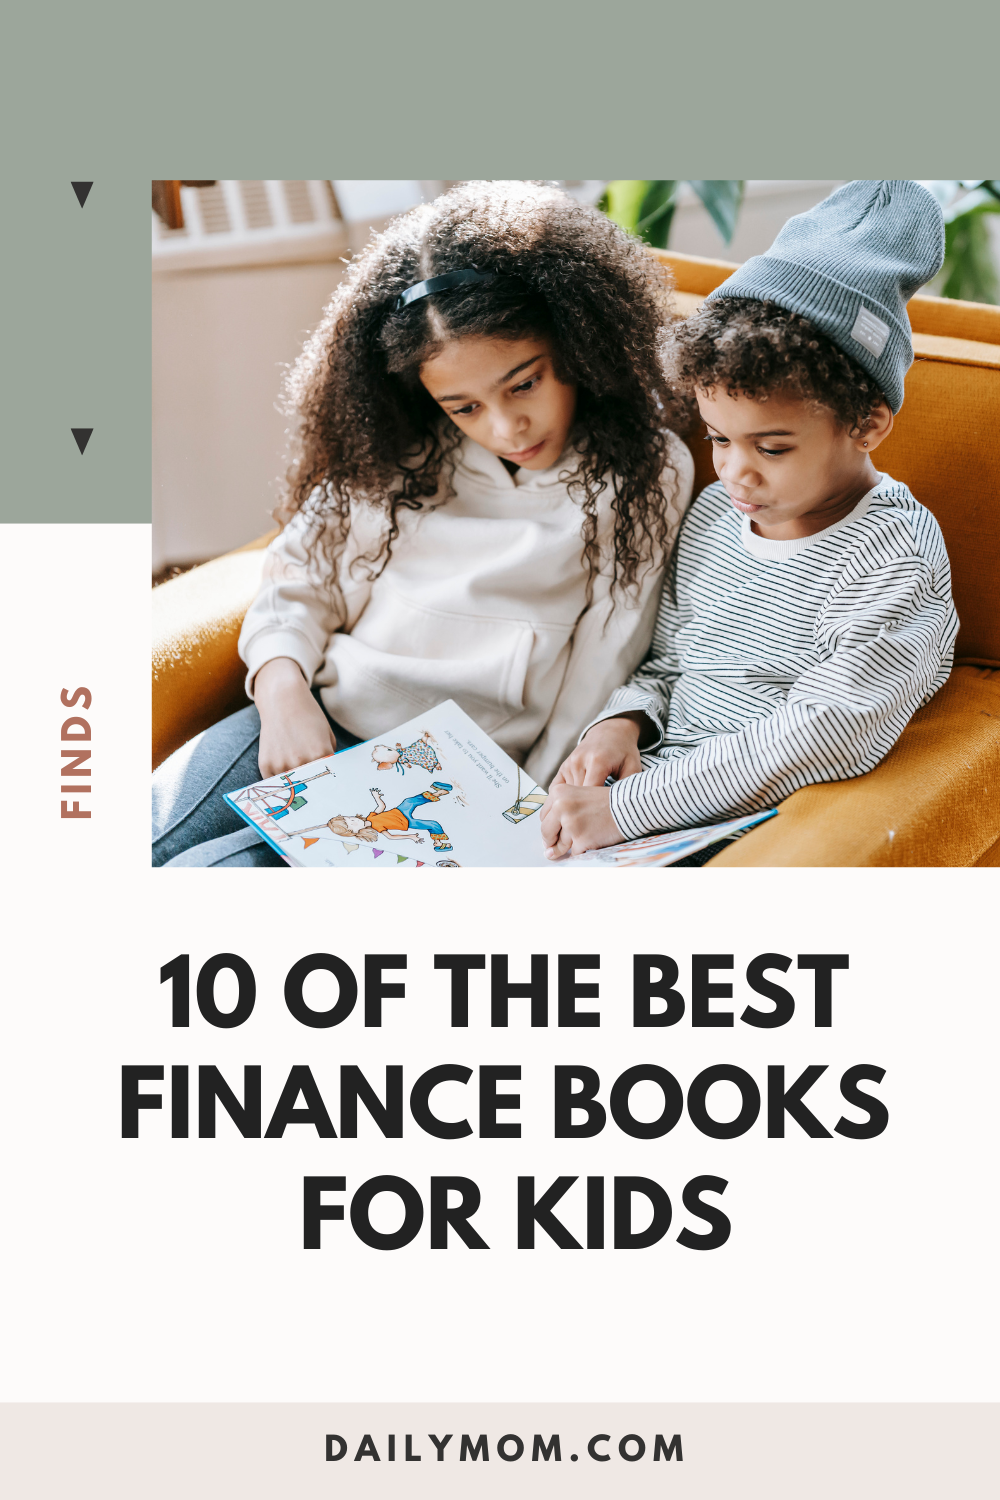 10 Of The Best Finance Books For Kids